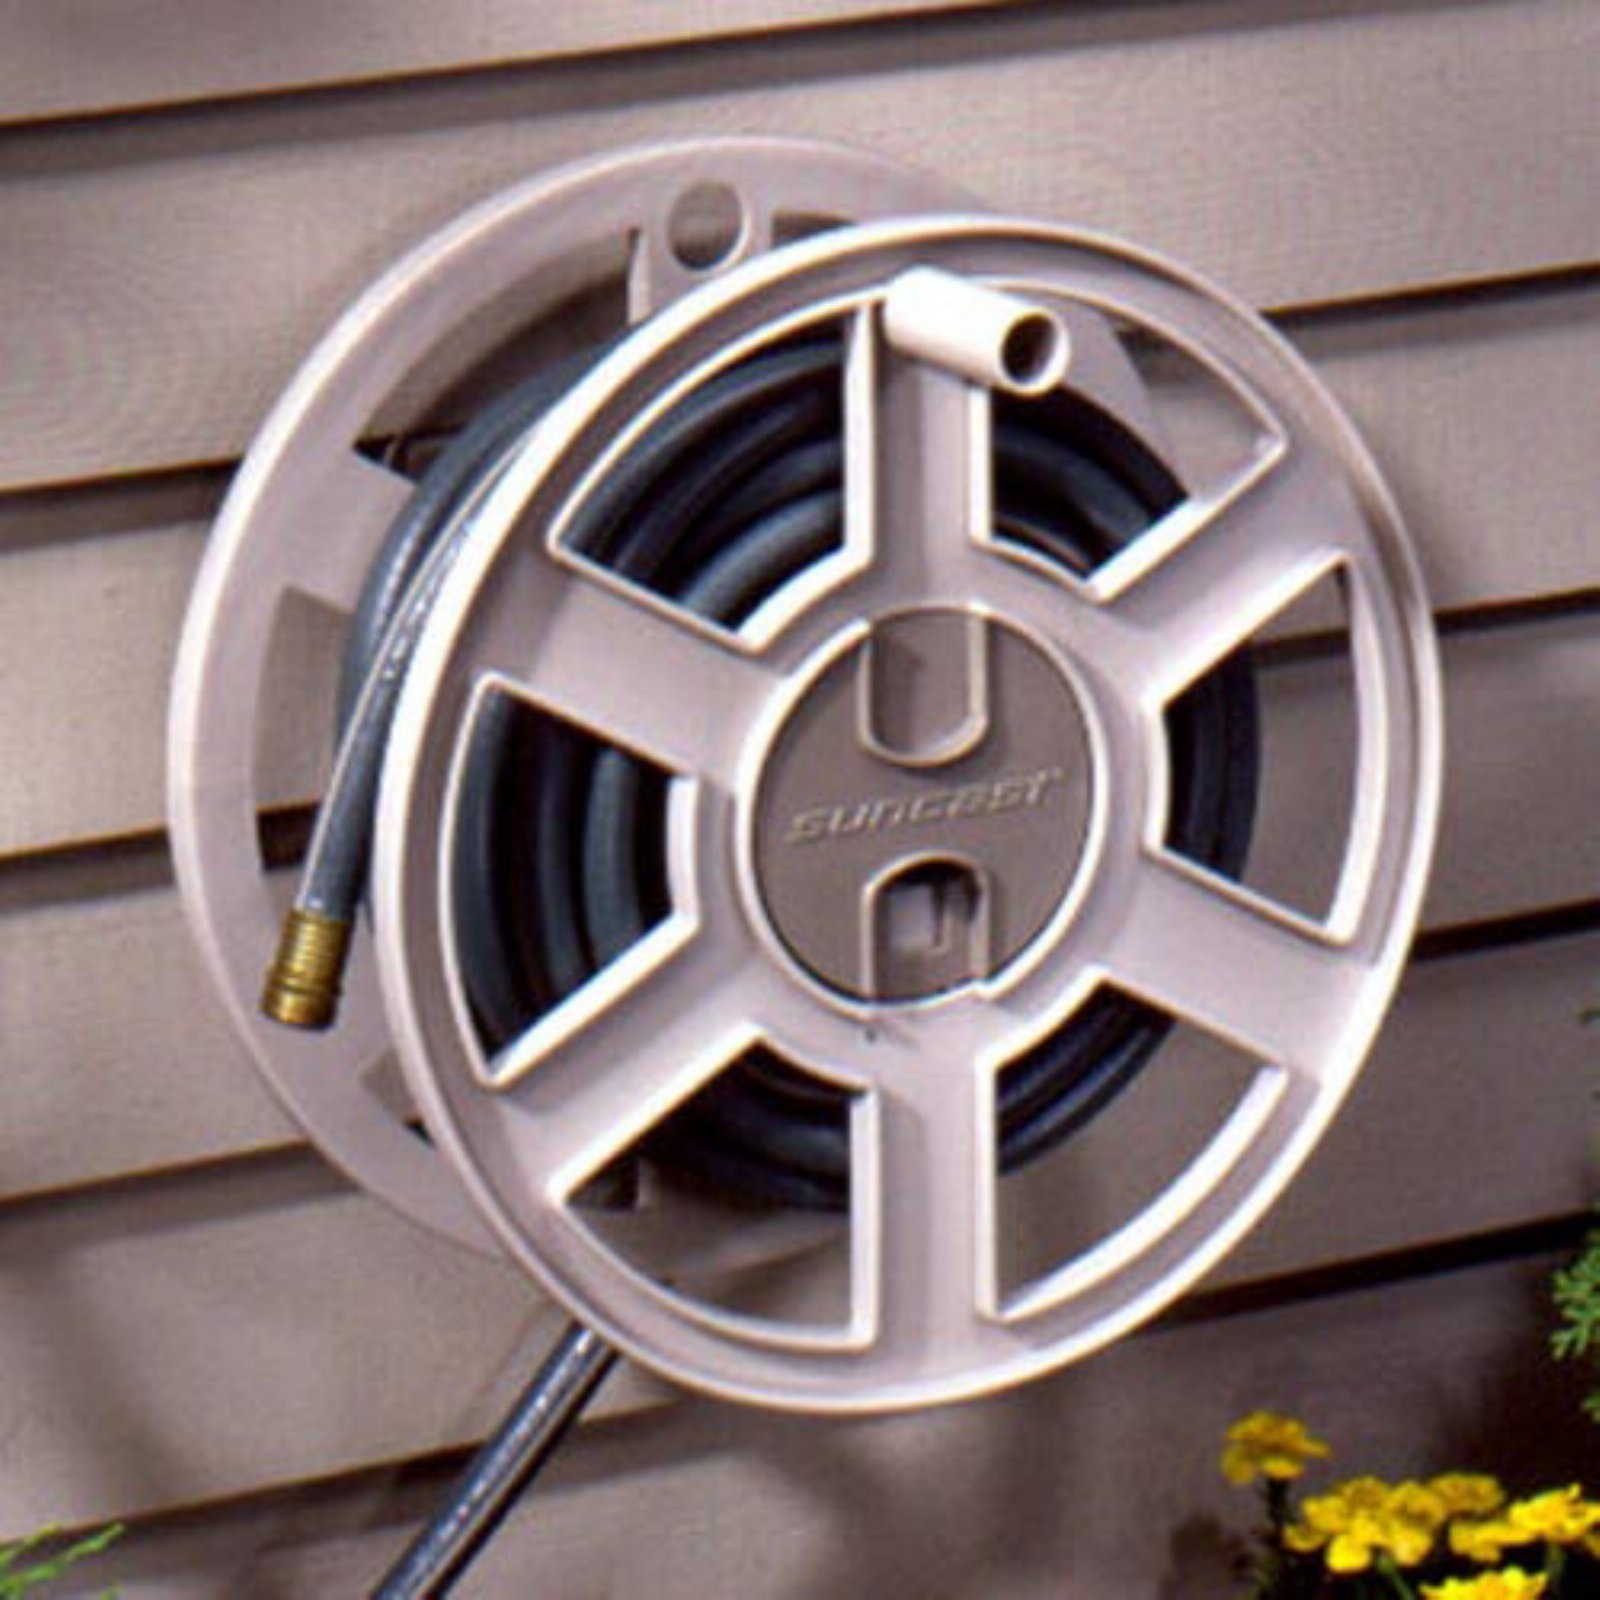 Gruener Hose Professional Wall Hose Reel Wall Hose Holder Stainless Steel INOX Palatina GS W50 1/2 Inch = 80 m 5/8 Inch = 60 m 3/4 Inch = 50 m